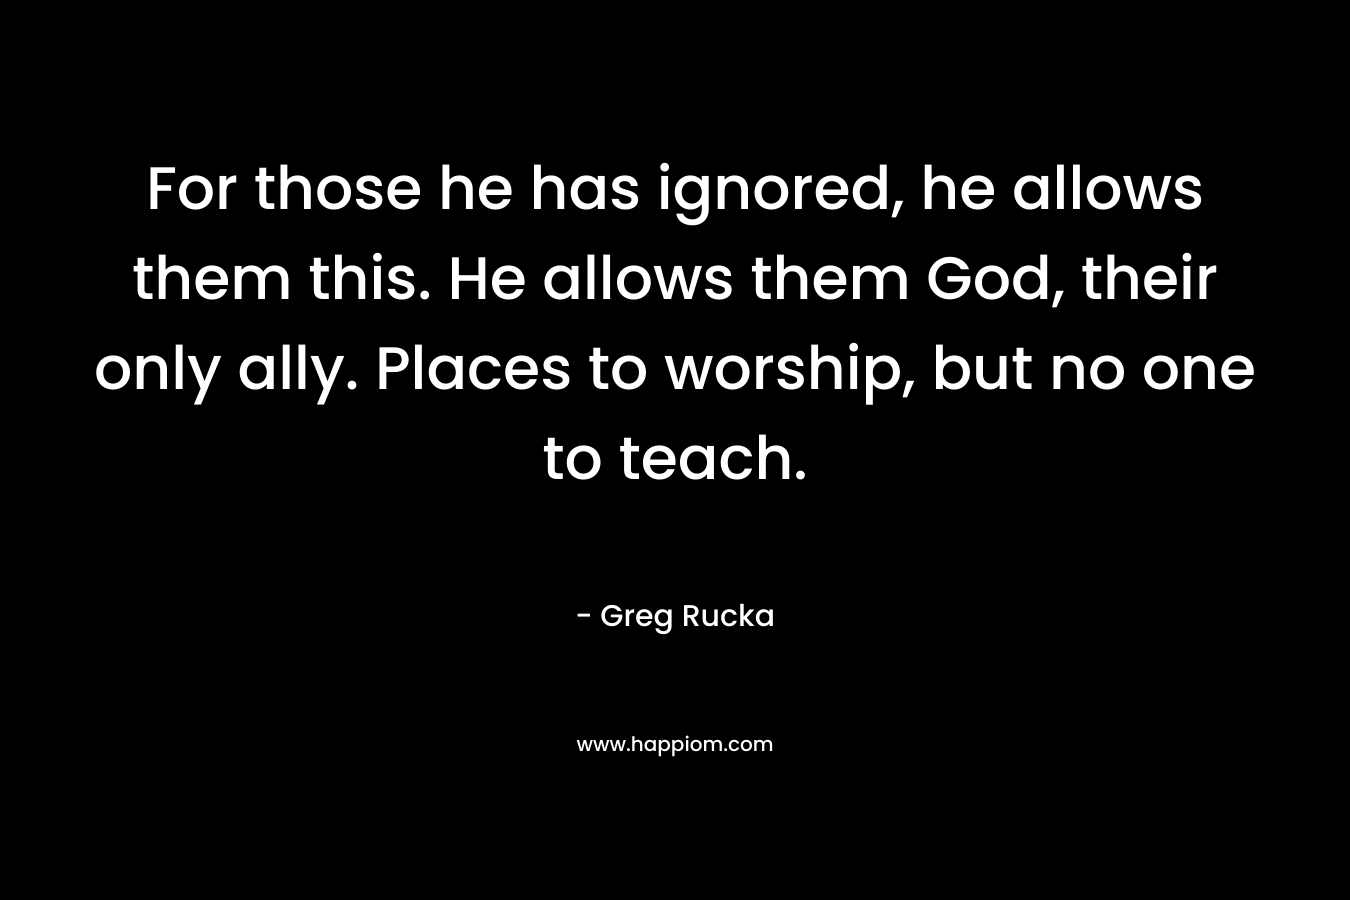 For those he has ignored, he allows them this. He allows them God, their only ally. Places to worship, but no one to teach. – Greg Rucka